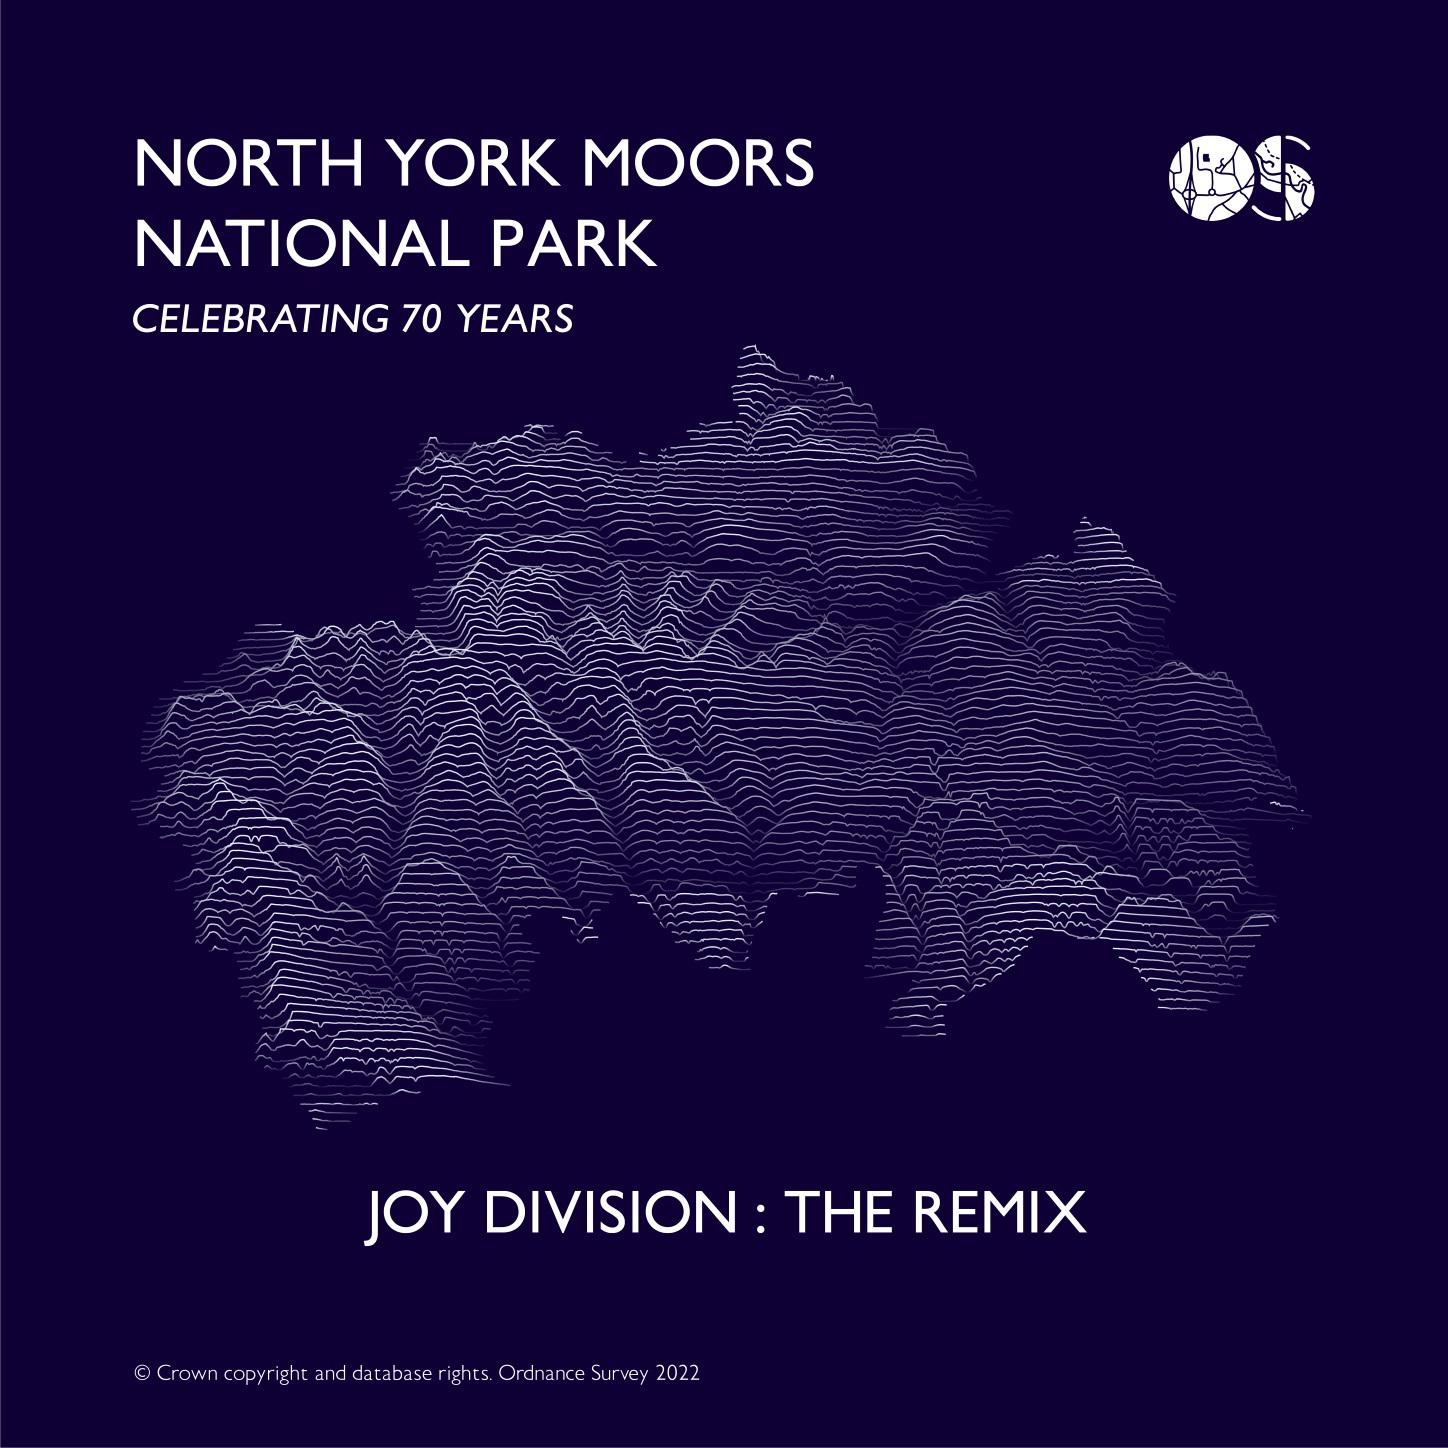 Joy Division: The Remix, Celebrating 70 years of the North York Moors National Park, Hannah Wright